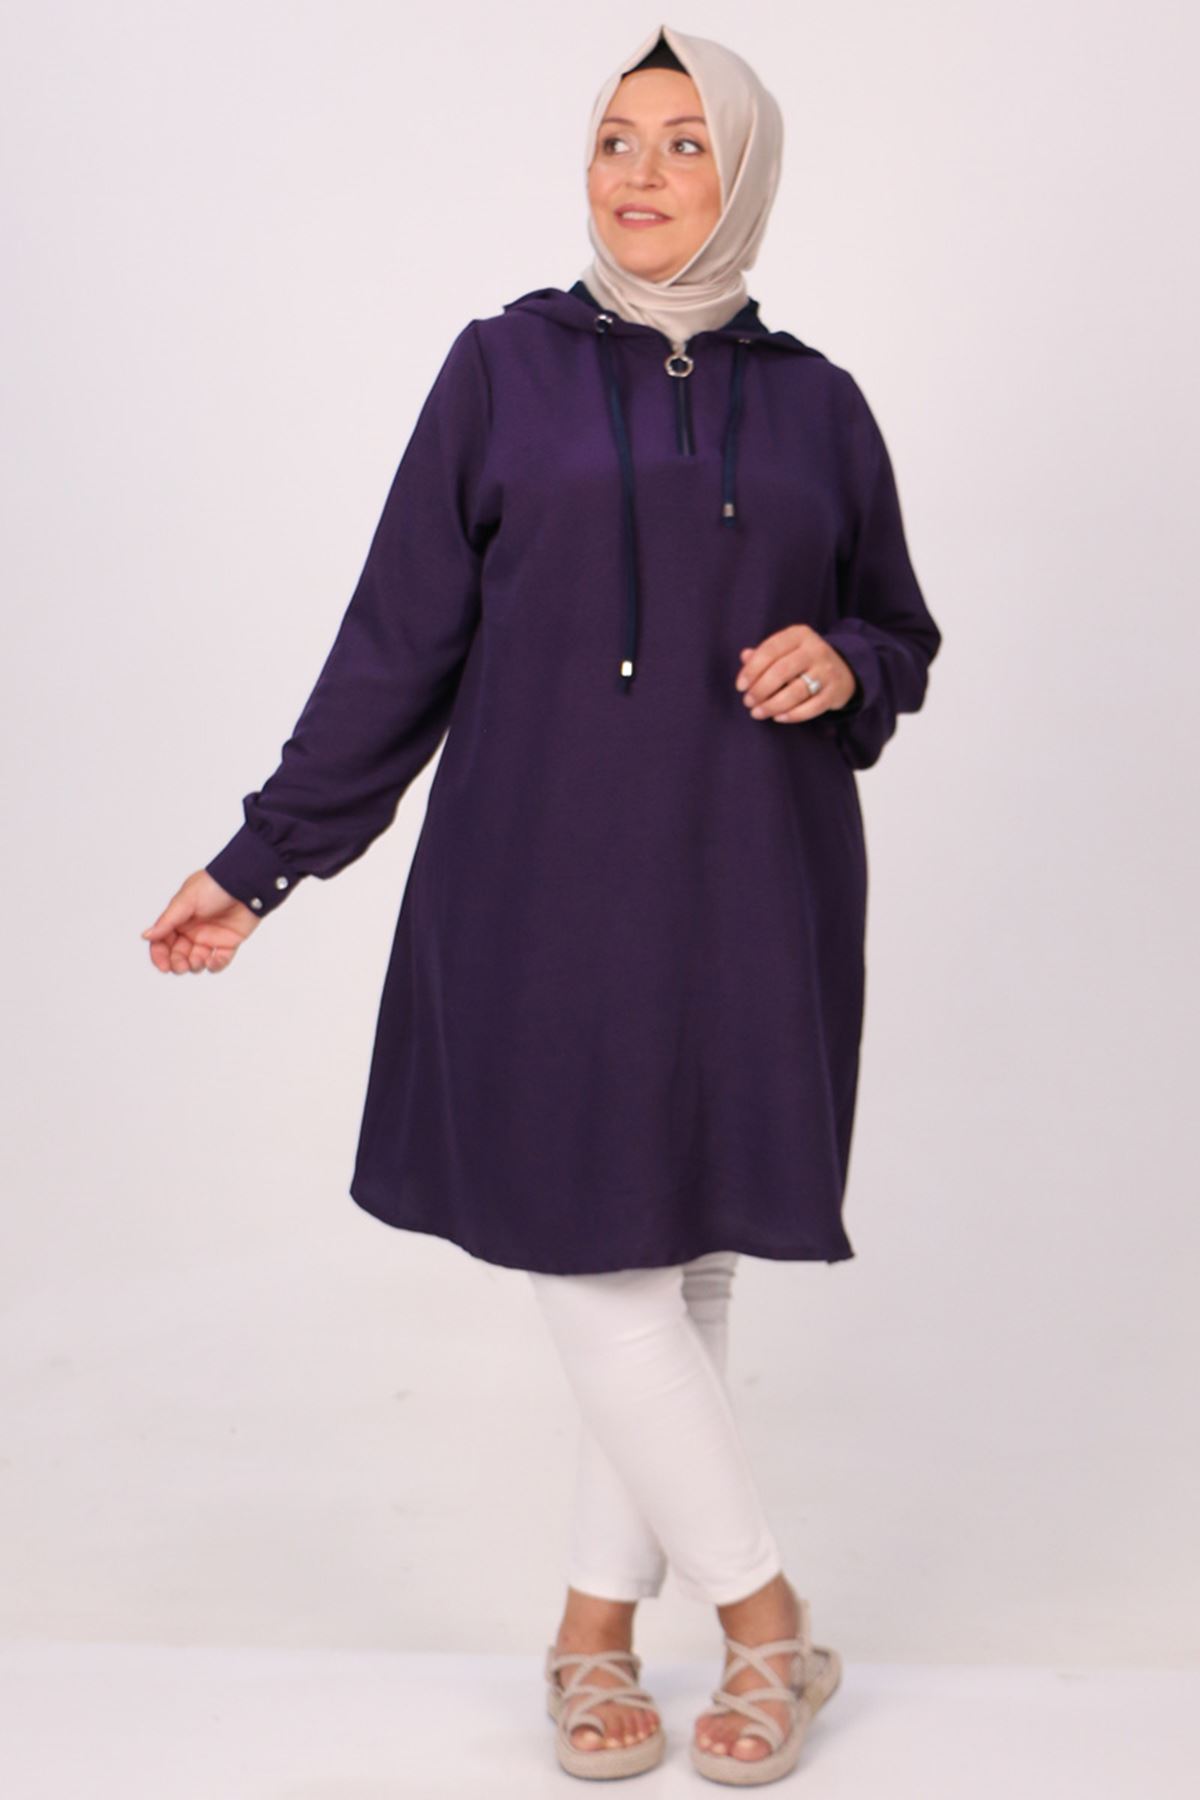 38109 Large Size Hooded Miracle Tunic - Purple